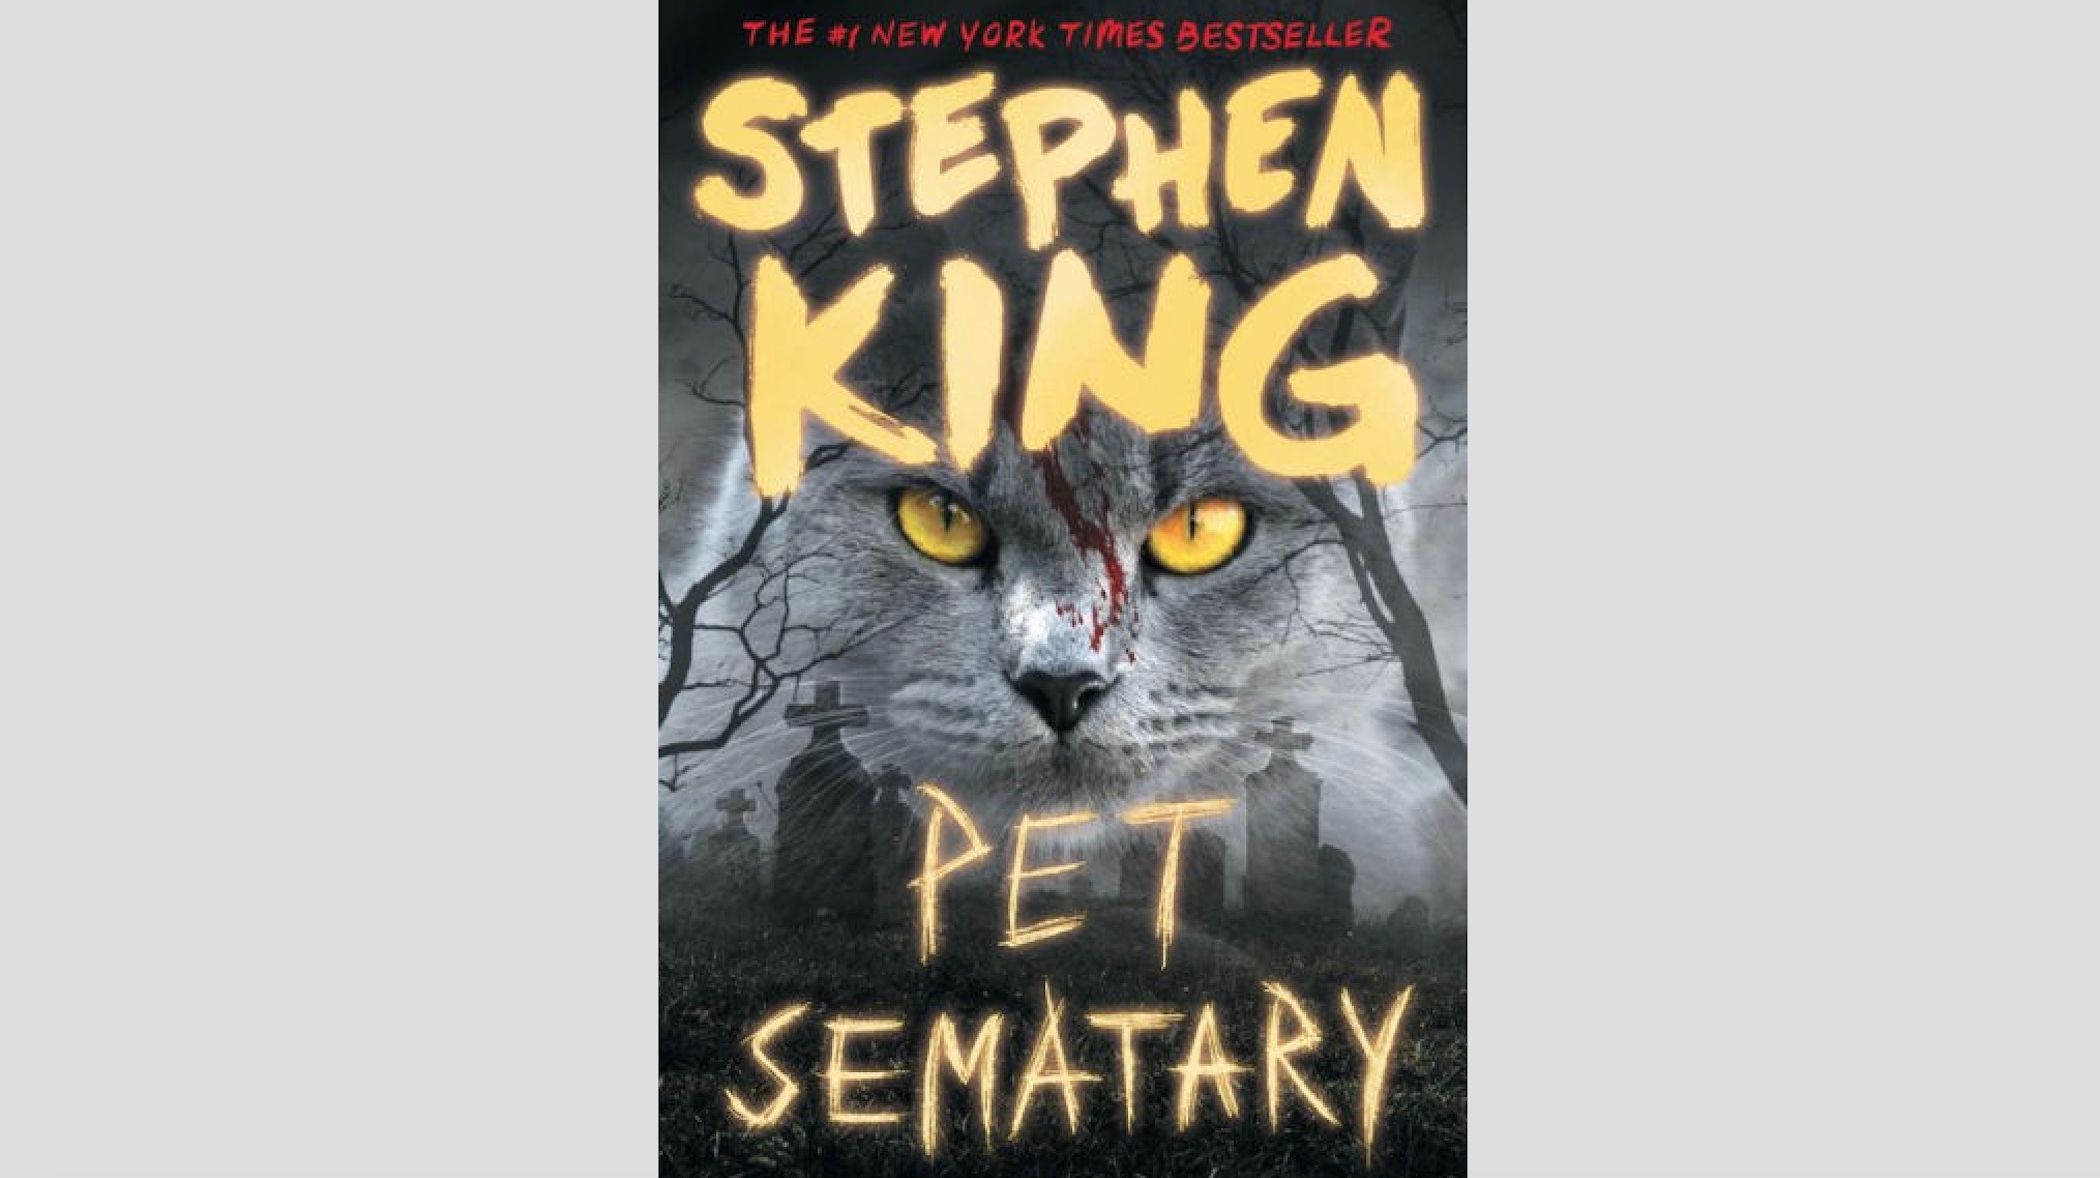 10 Facts About Stephen Kings Pet Sematary Mental Floss - 